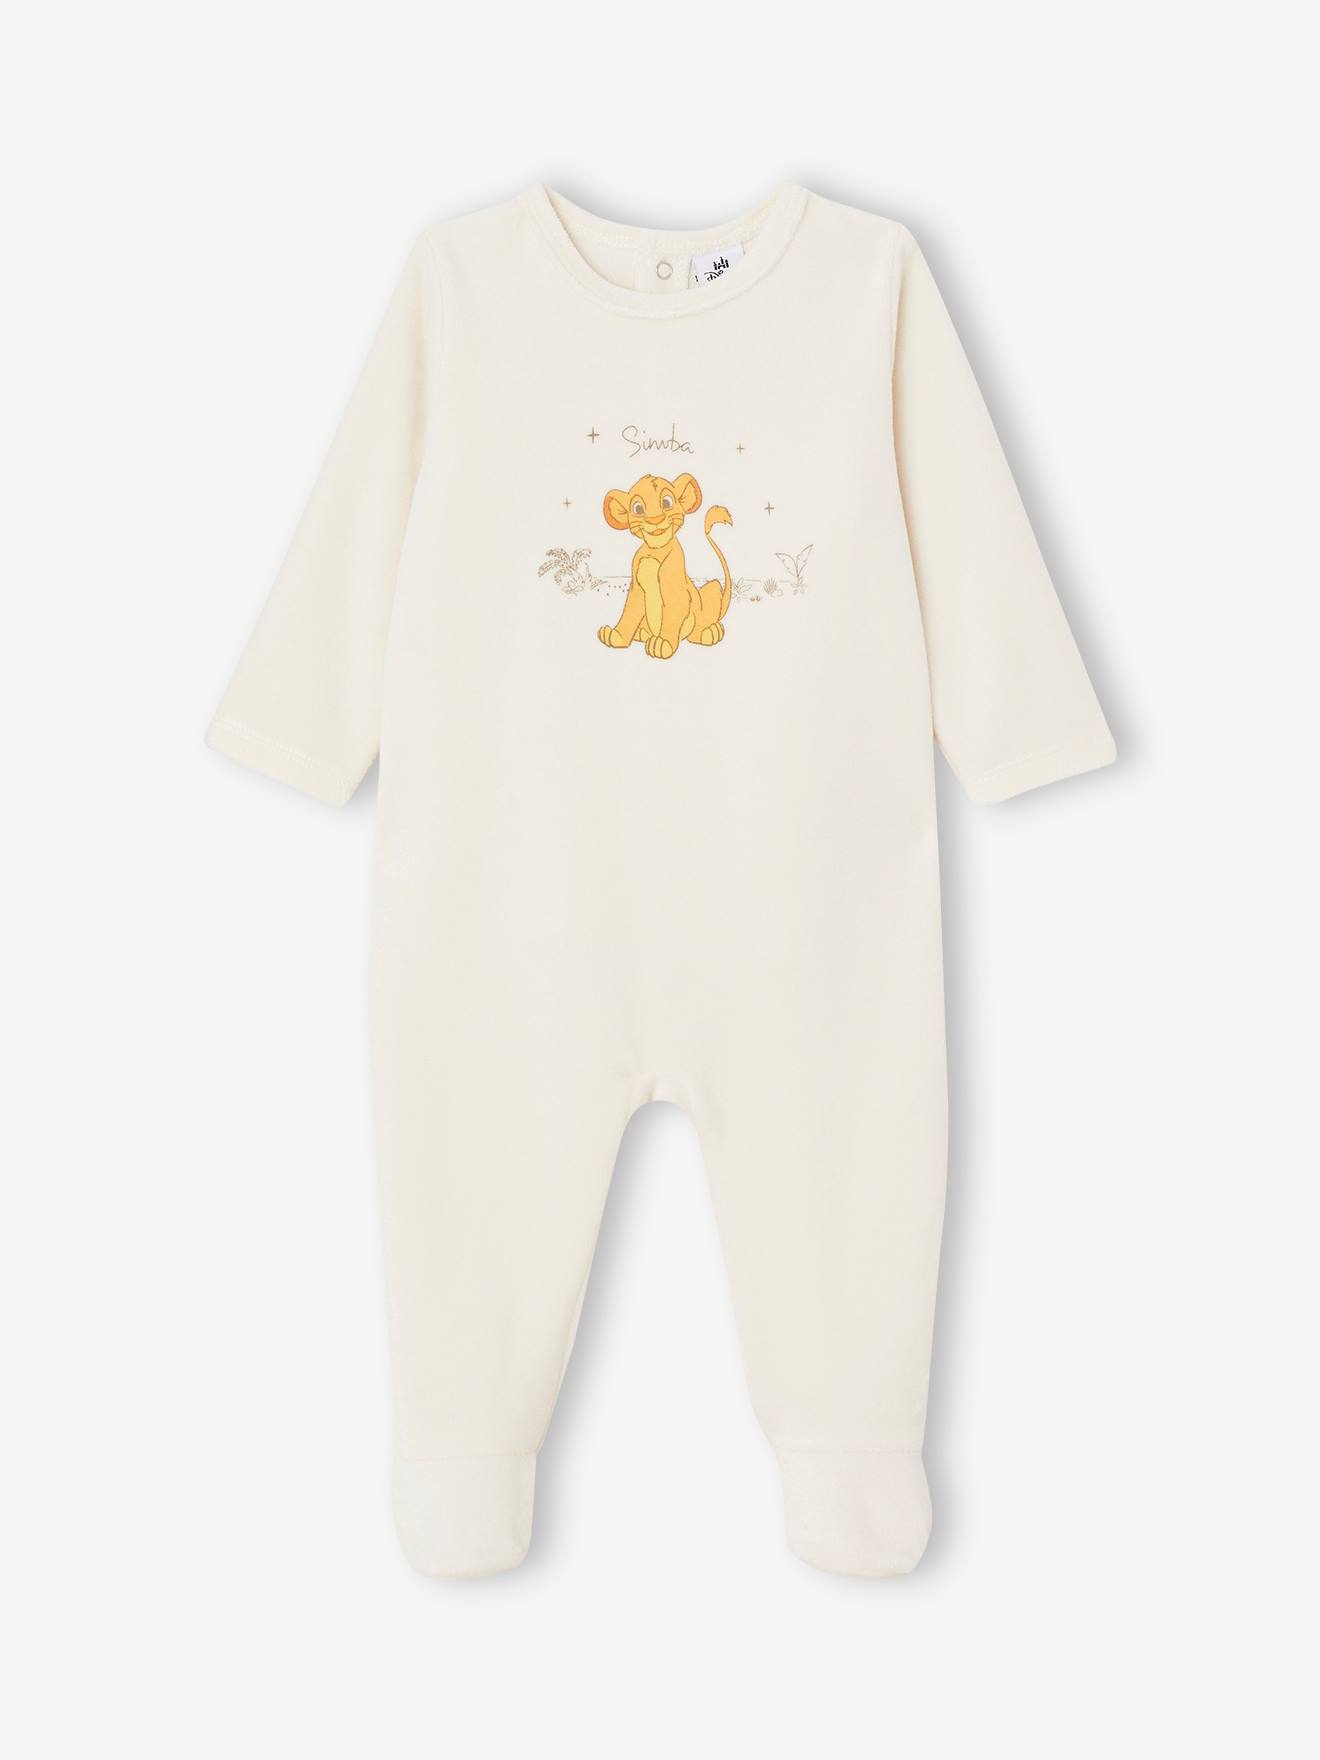 The Lion King Velour Sleepsuit for Baby Boys by Disney(r) ecru